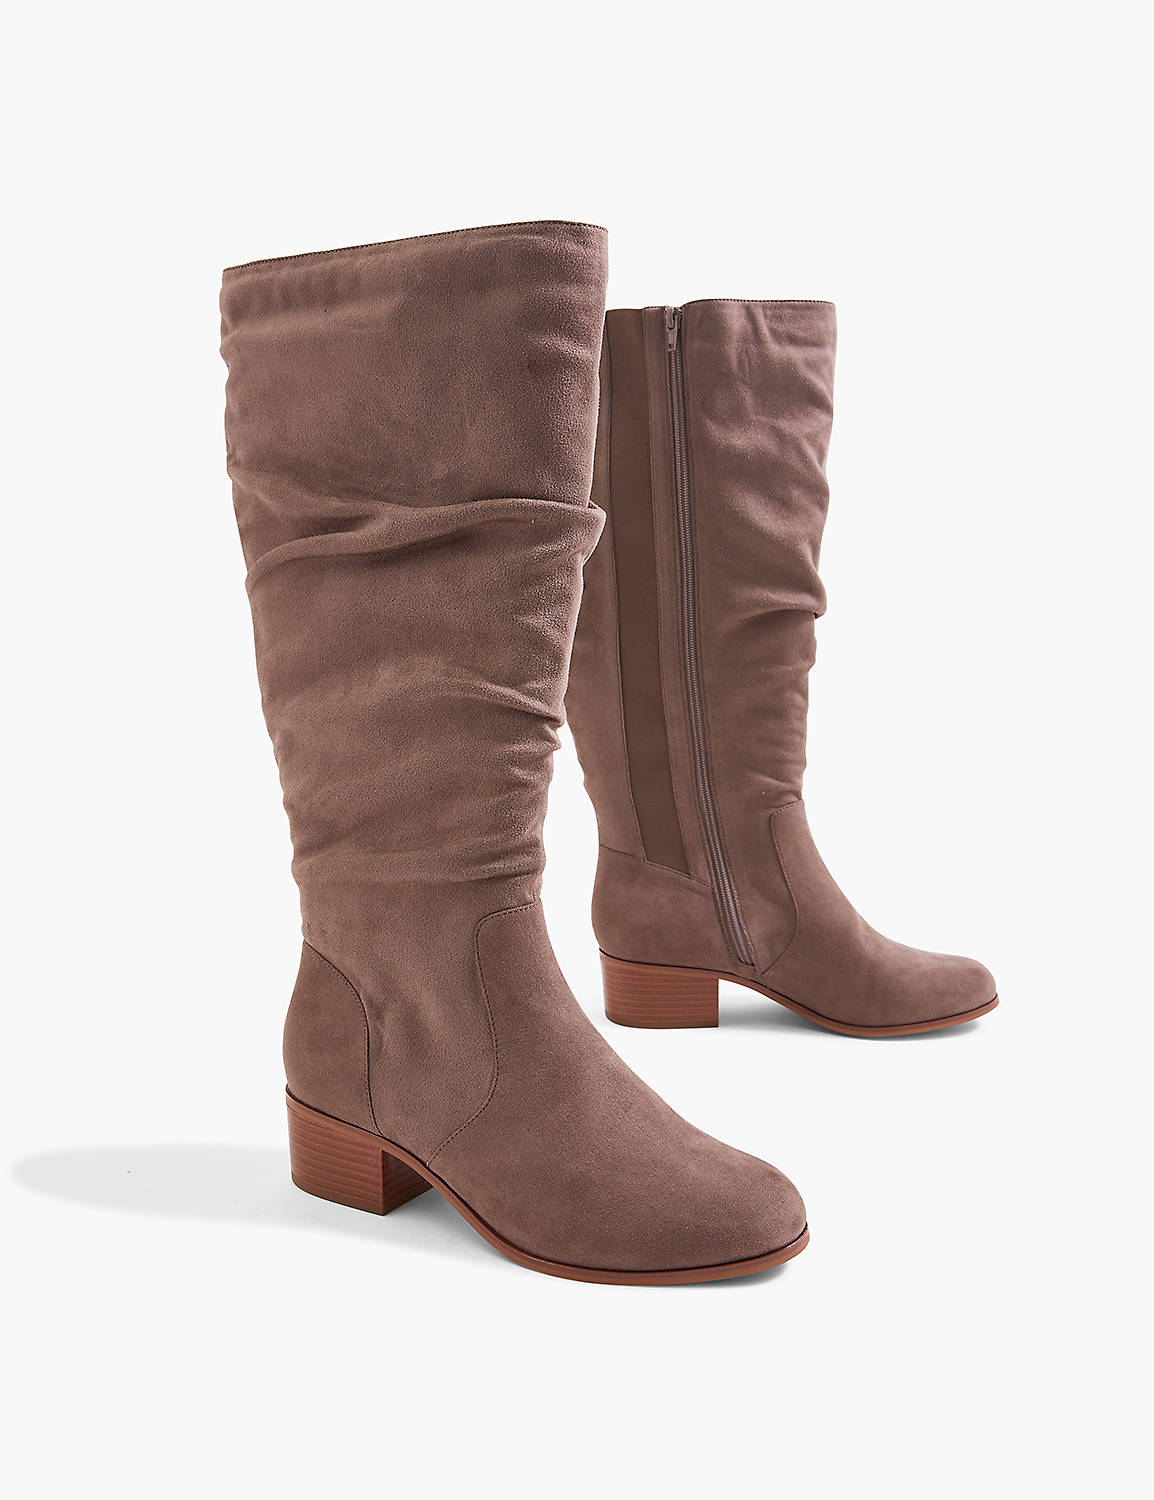 Slouch Tall Boot Product Image 1